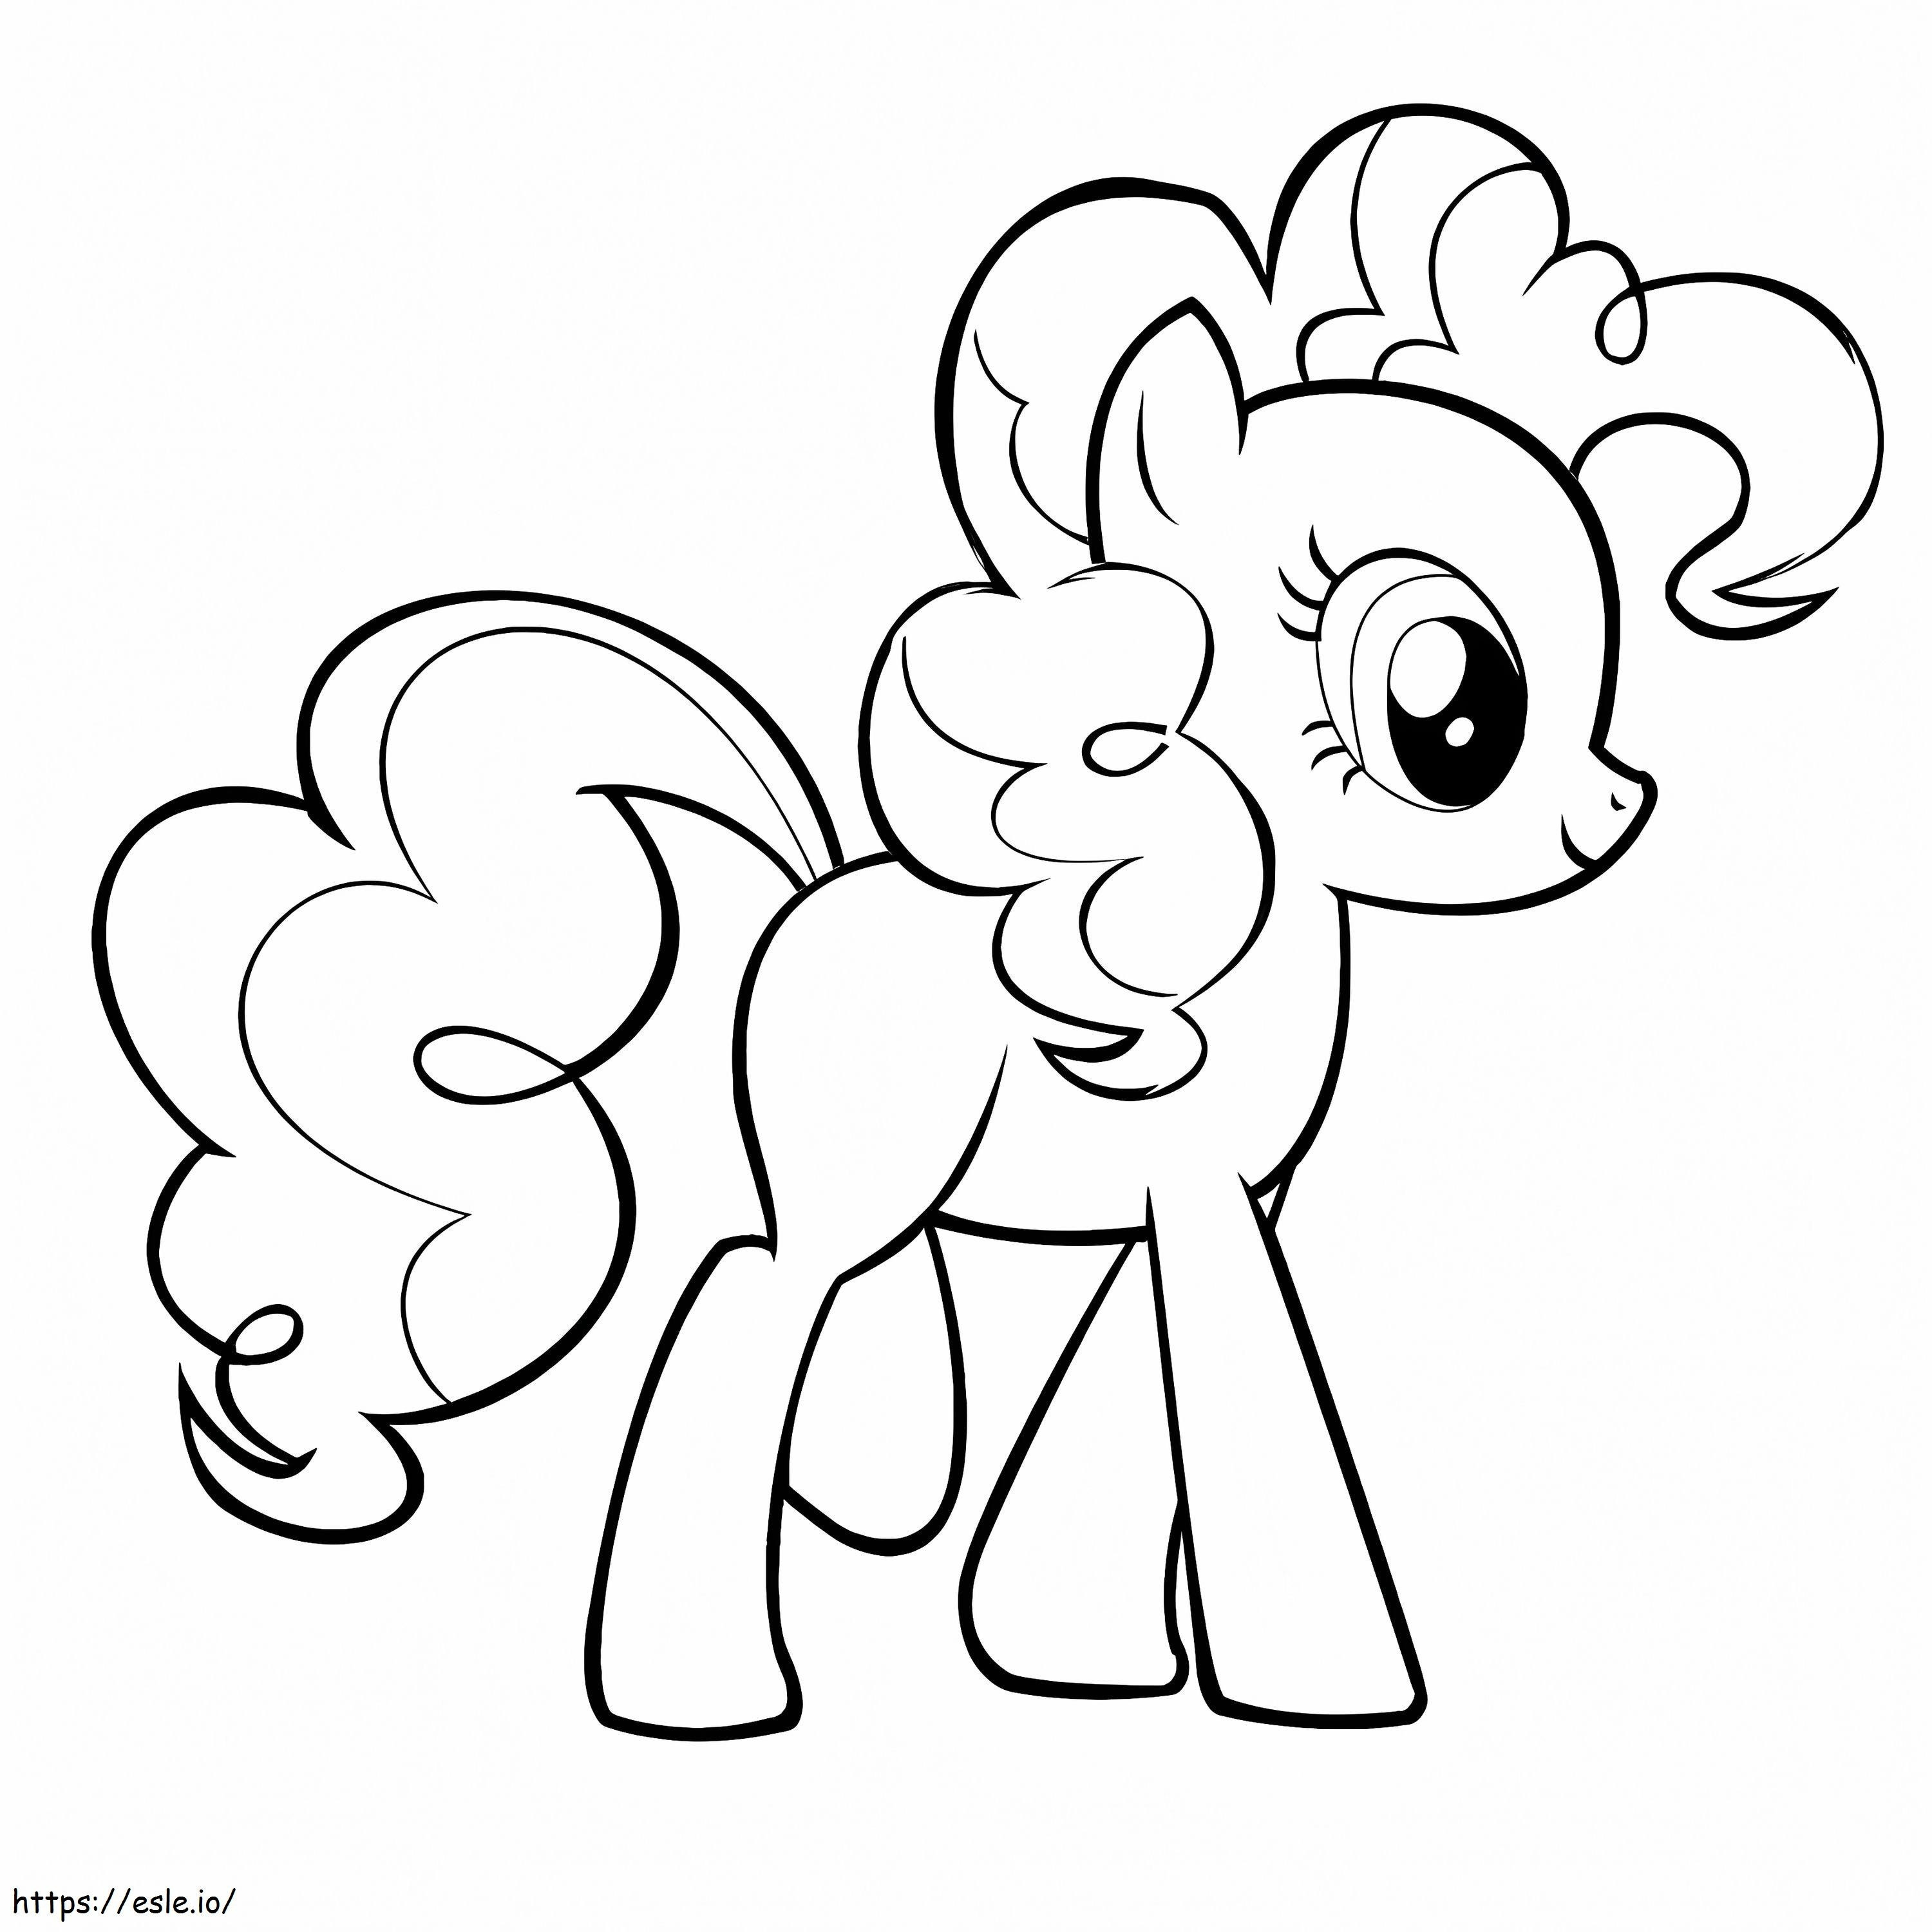 Pinkie Pie From MLP coloring page